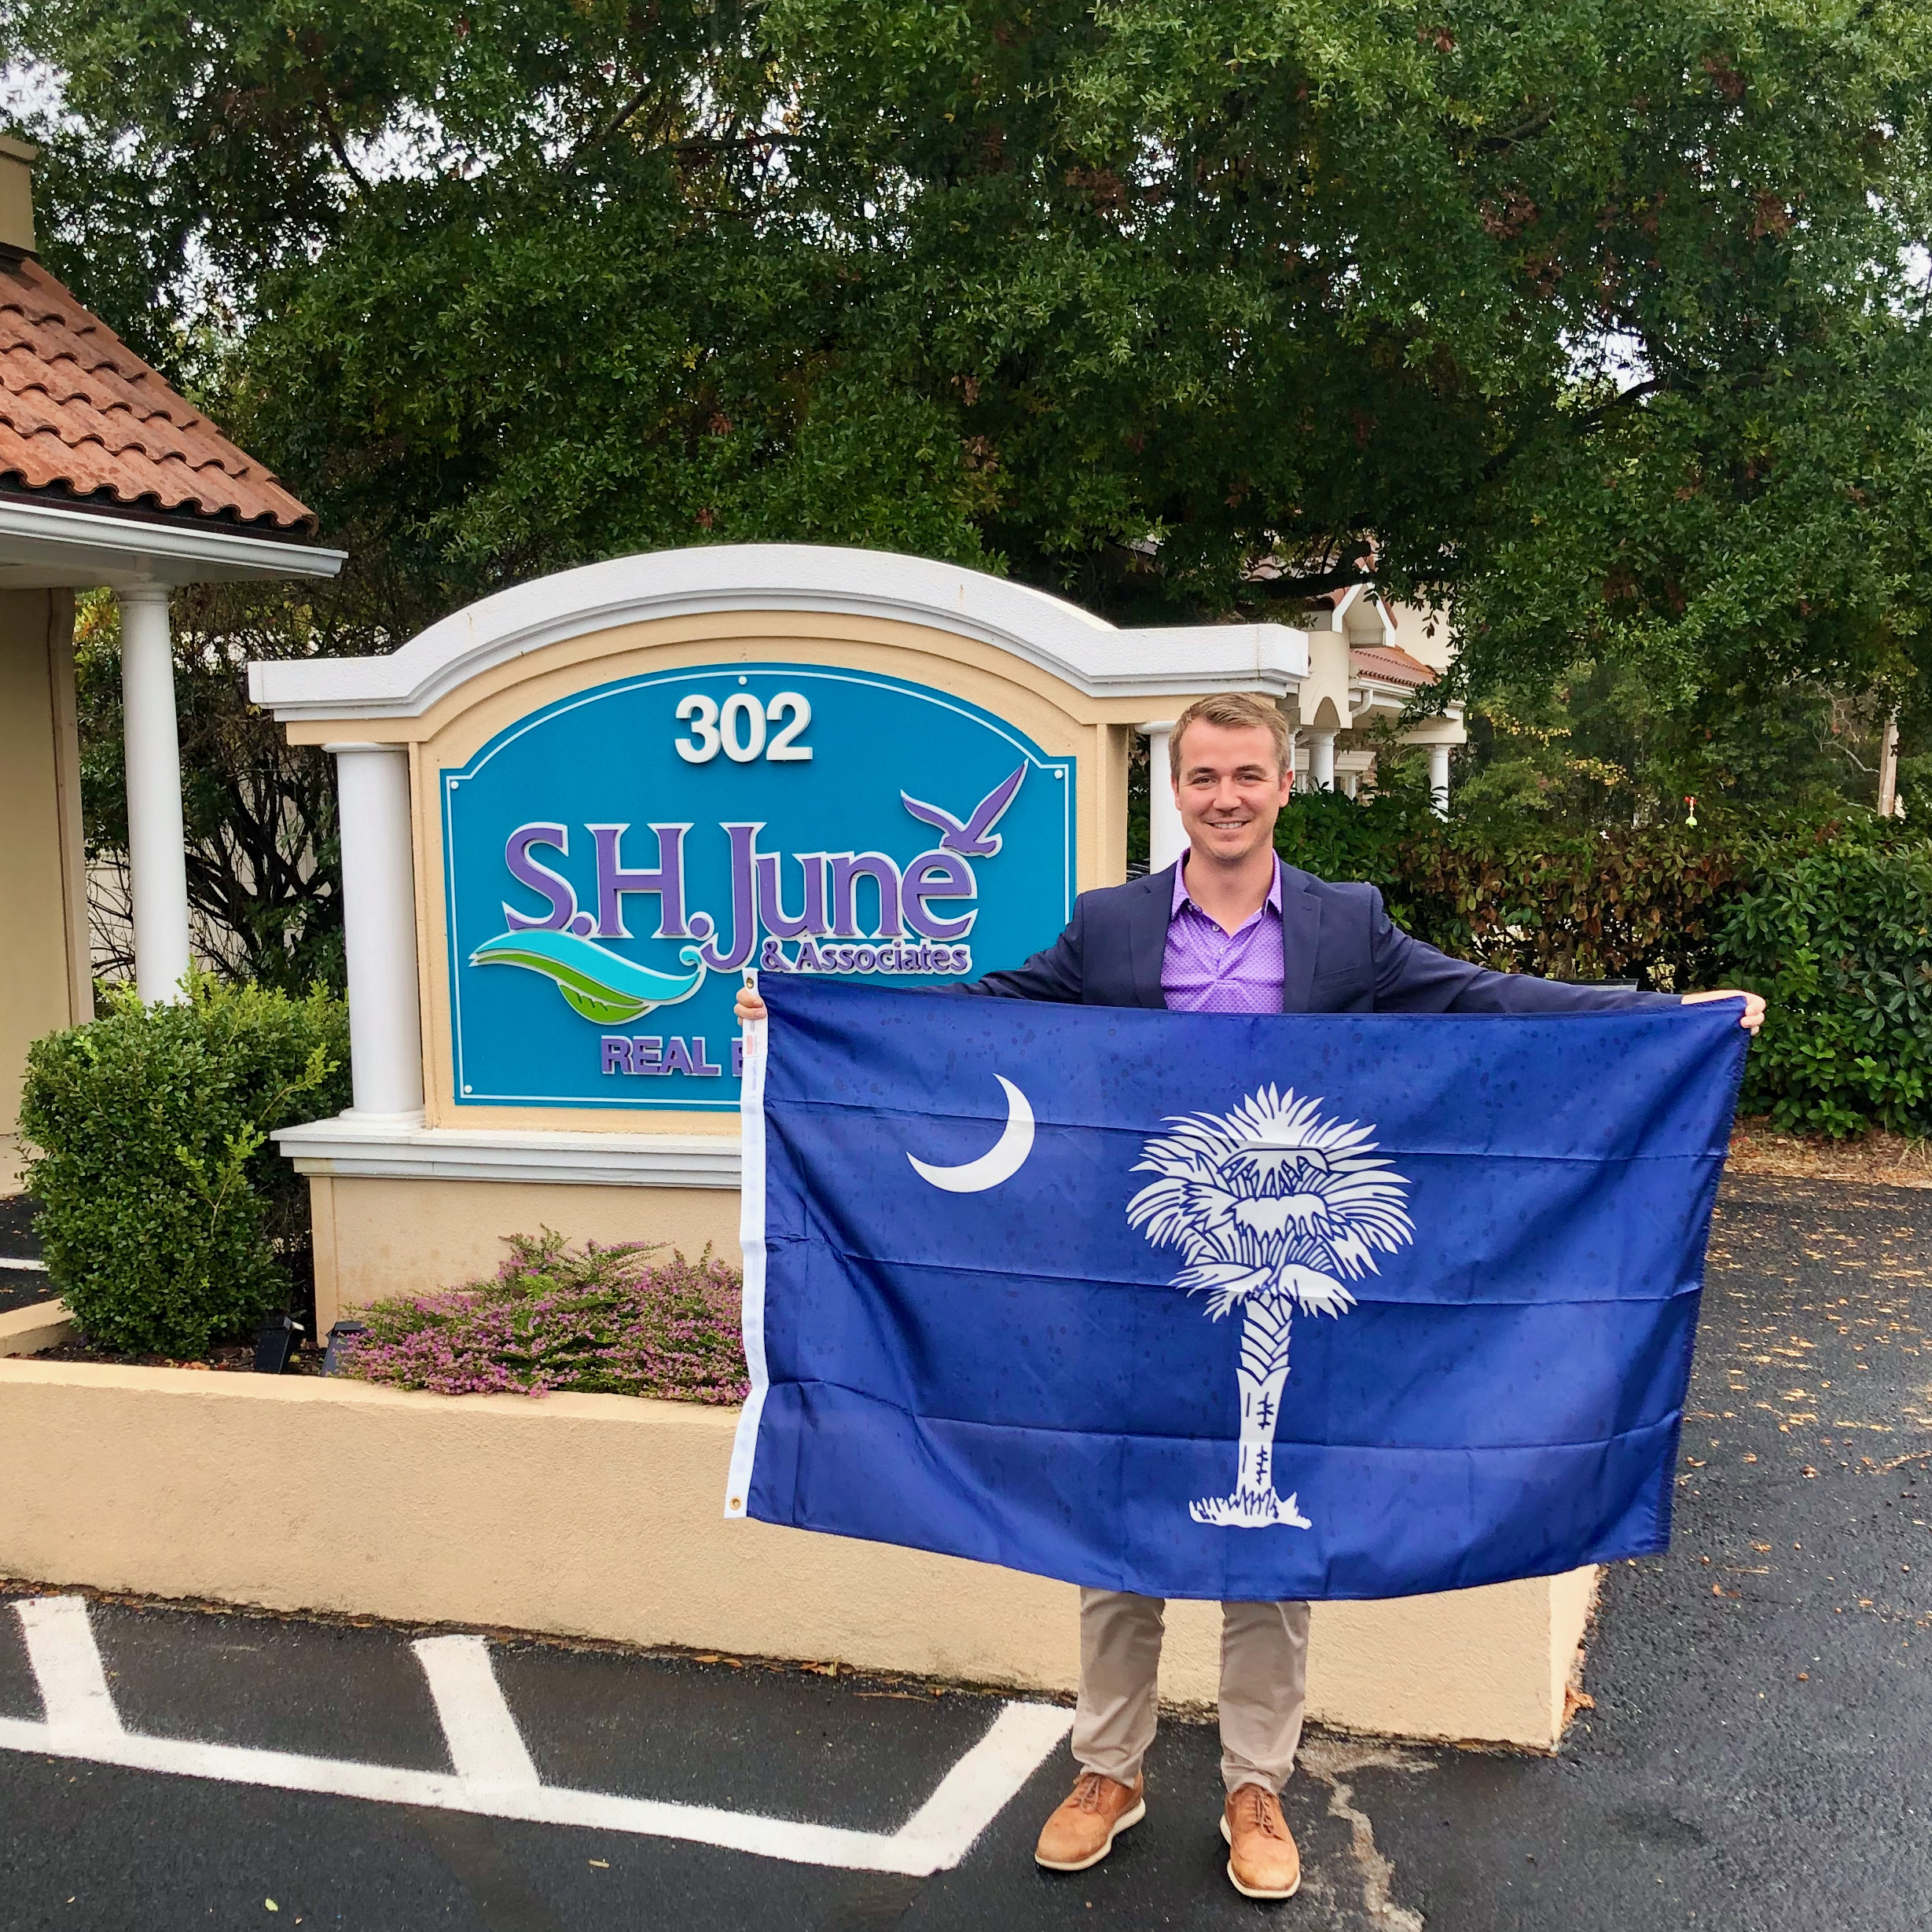 This South Carolina State Flag flew at the state capital and was presented to Seth June (pictured holding the flag) for his continual contribution to the Realtor Party.